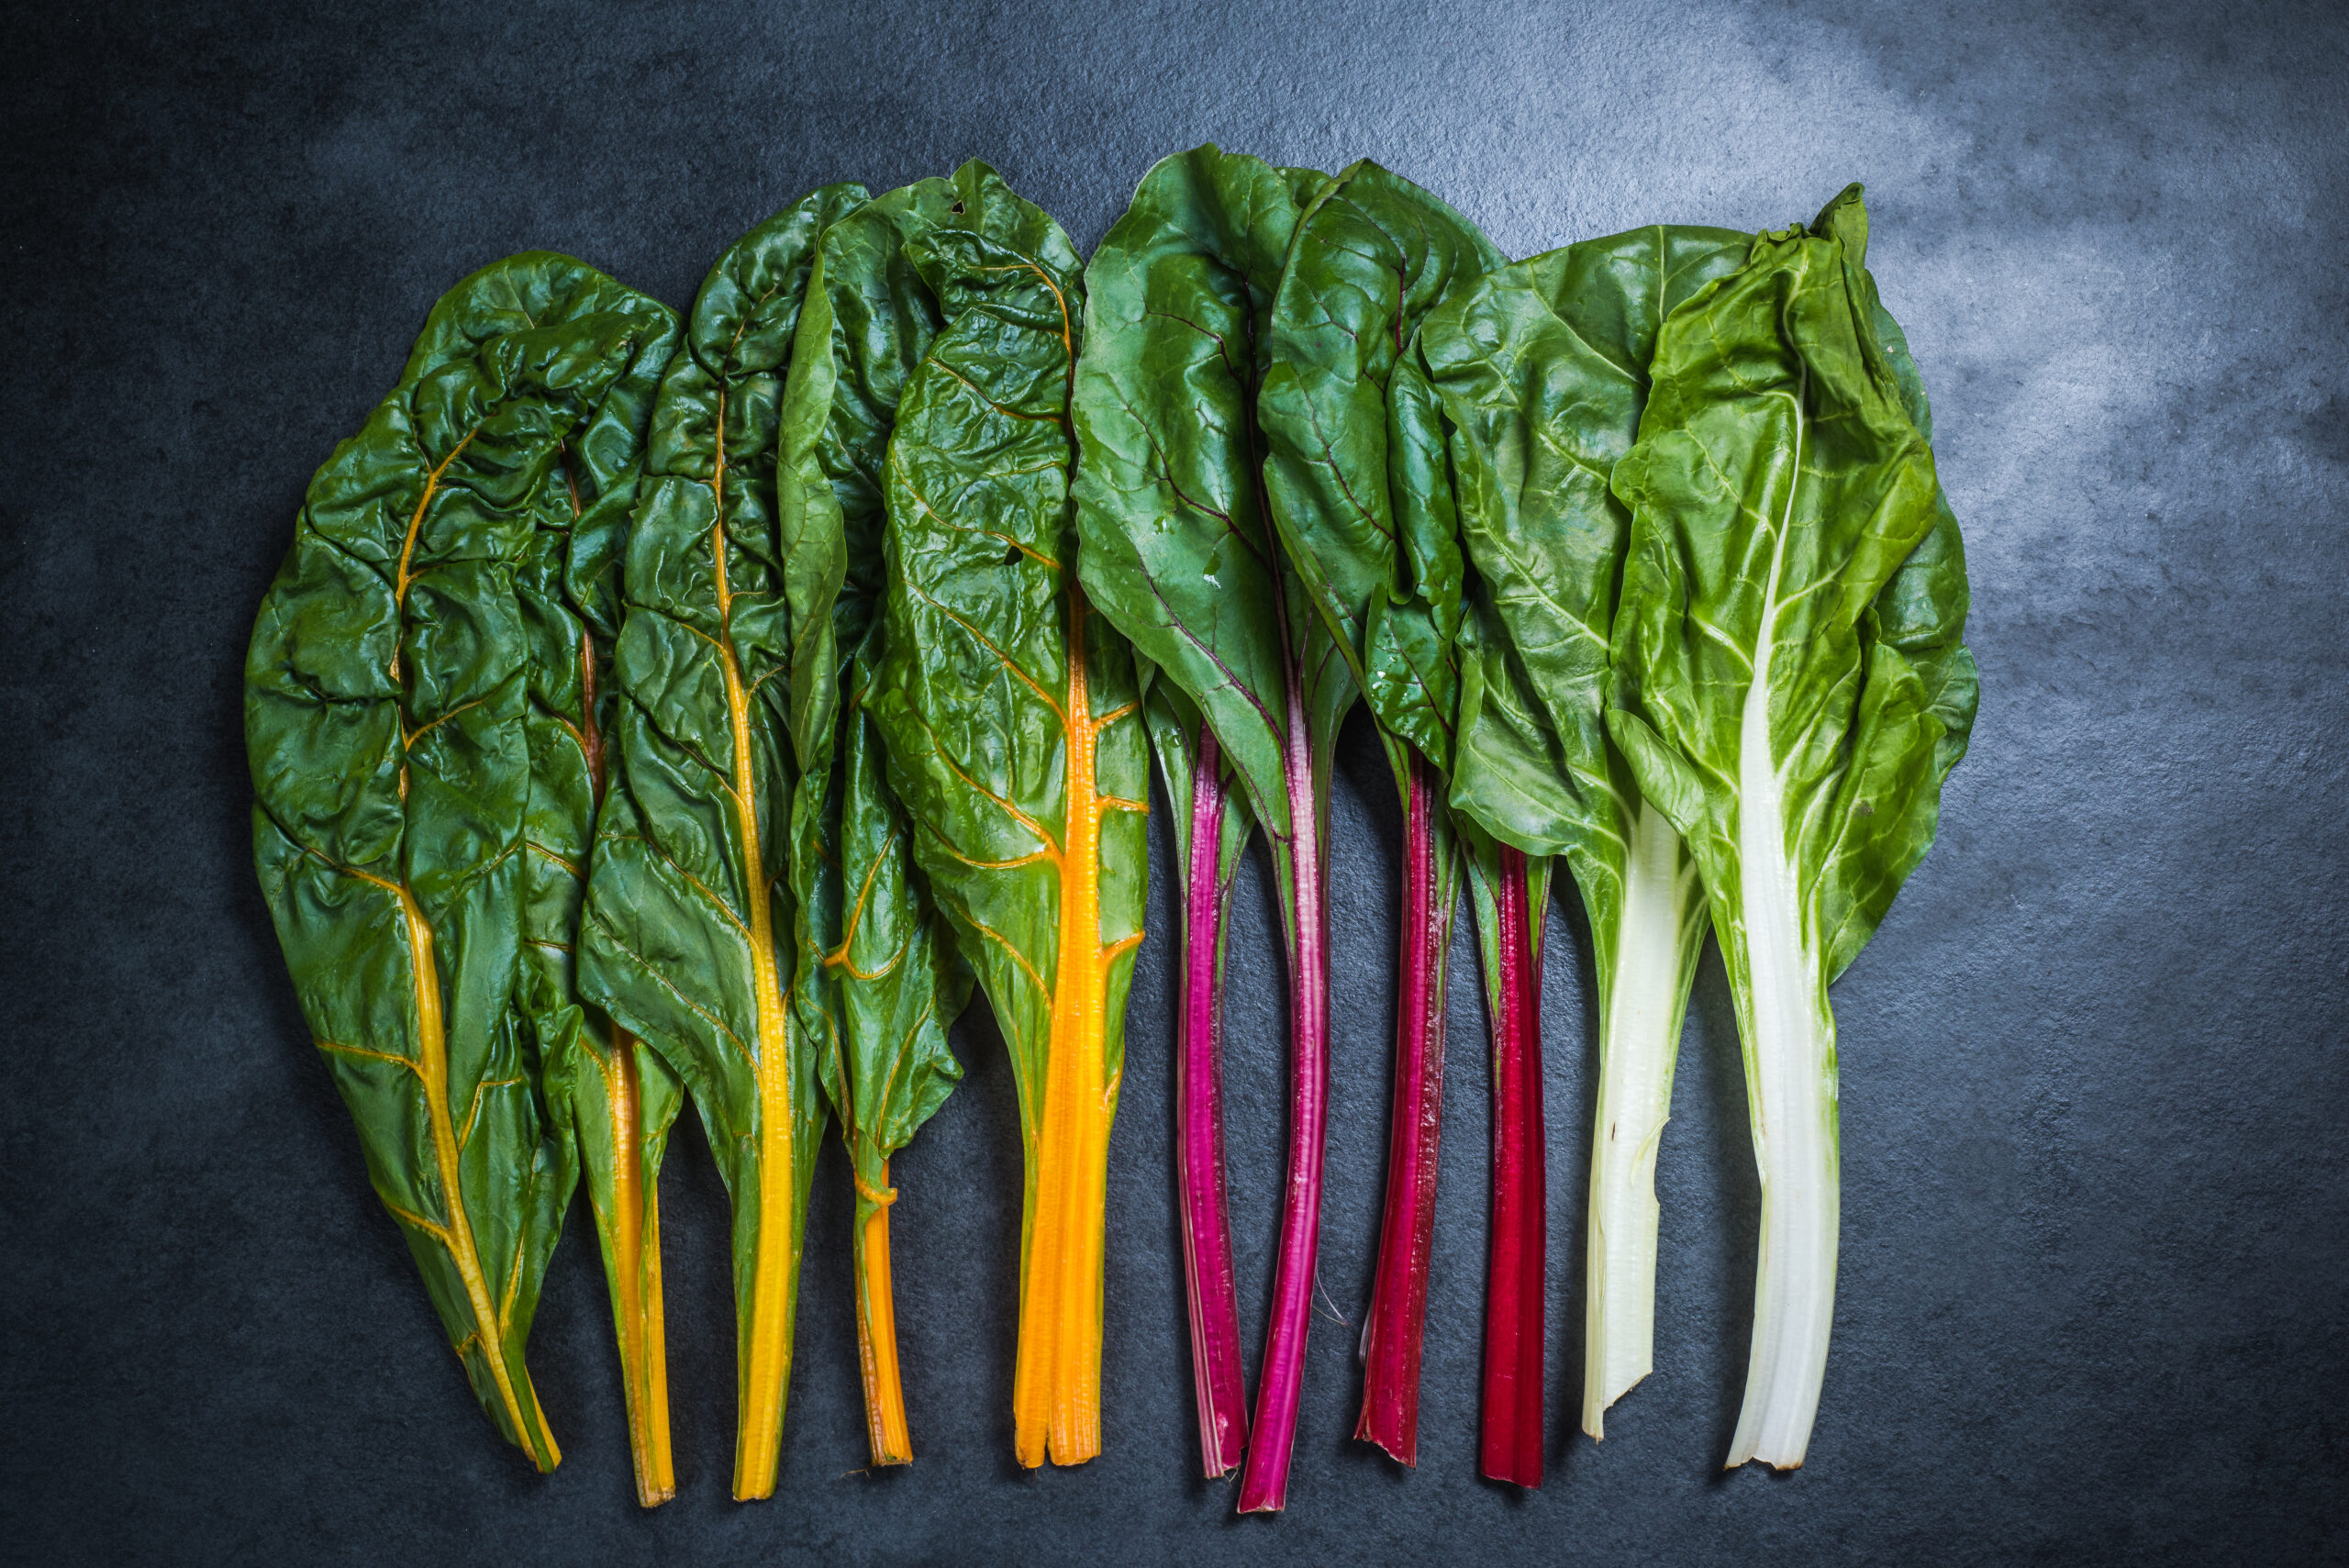 Learn all the benefits and properties of chard, a very nutritious vegetable.